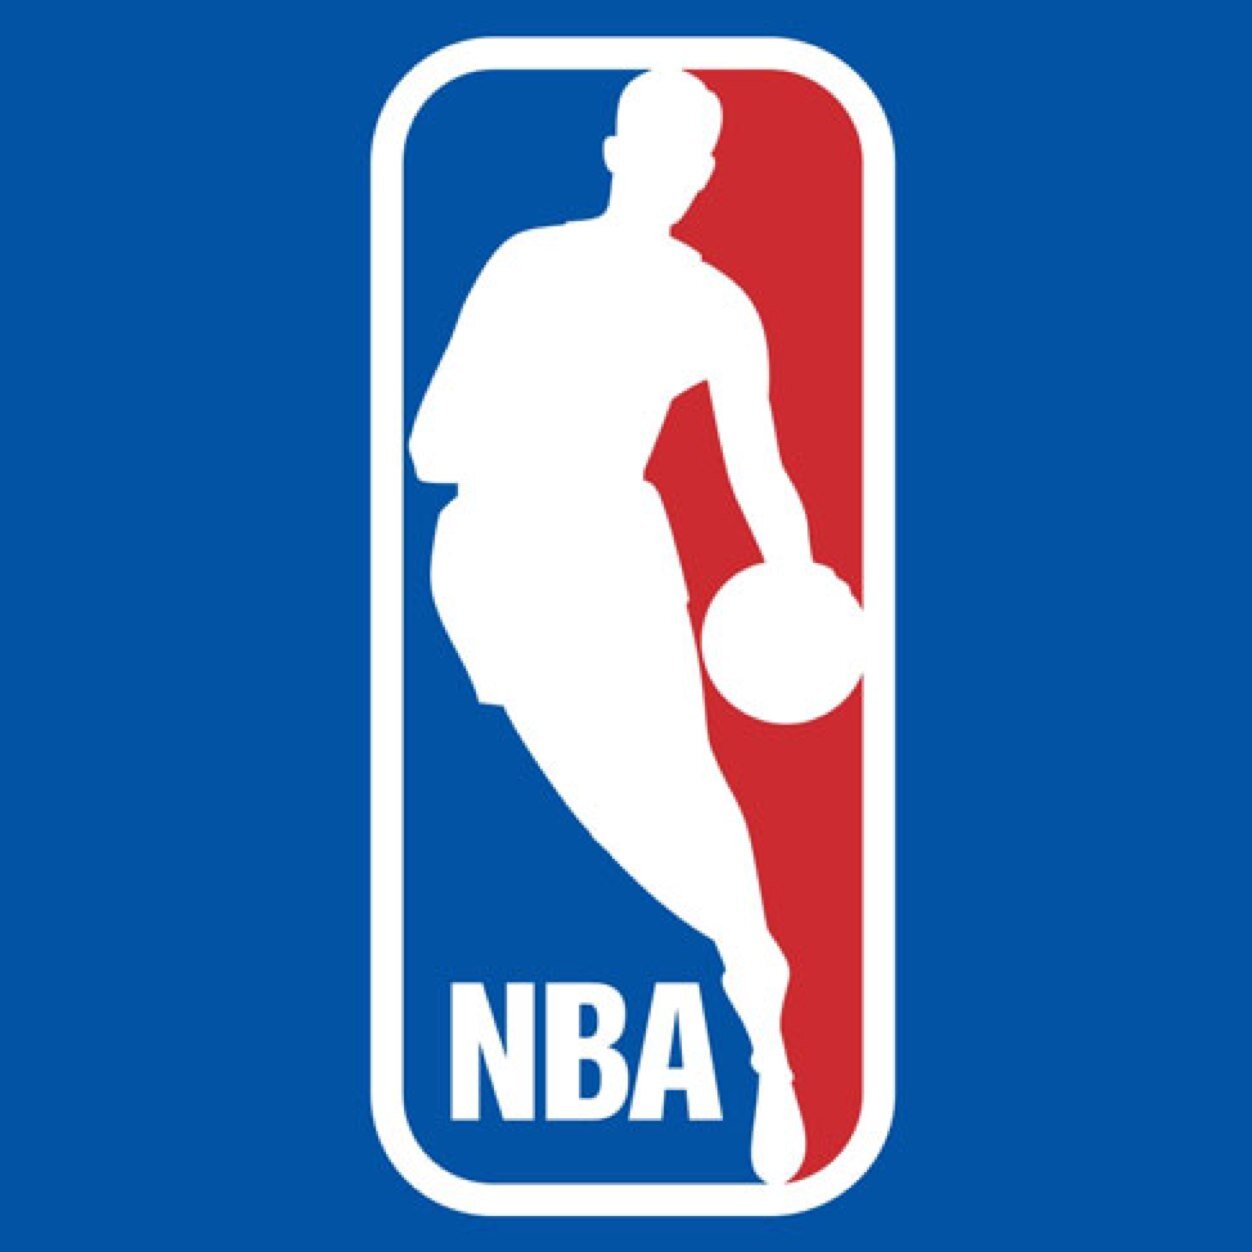 New NBA account. Latest updates from around the league